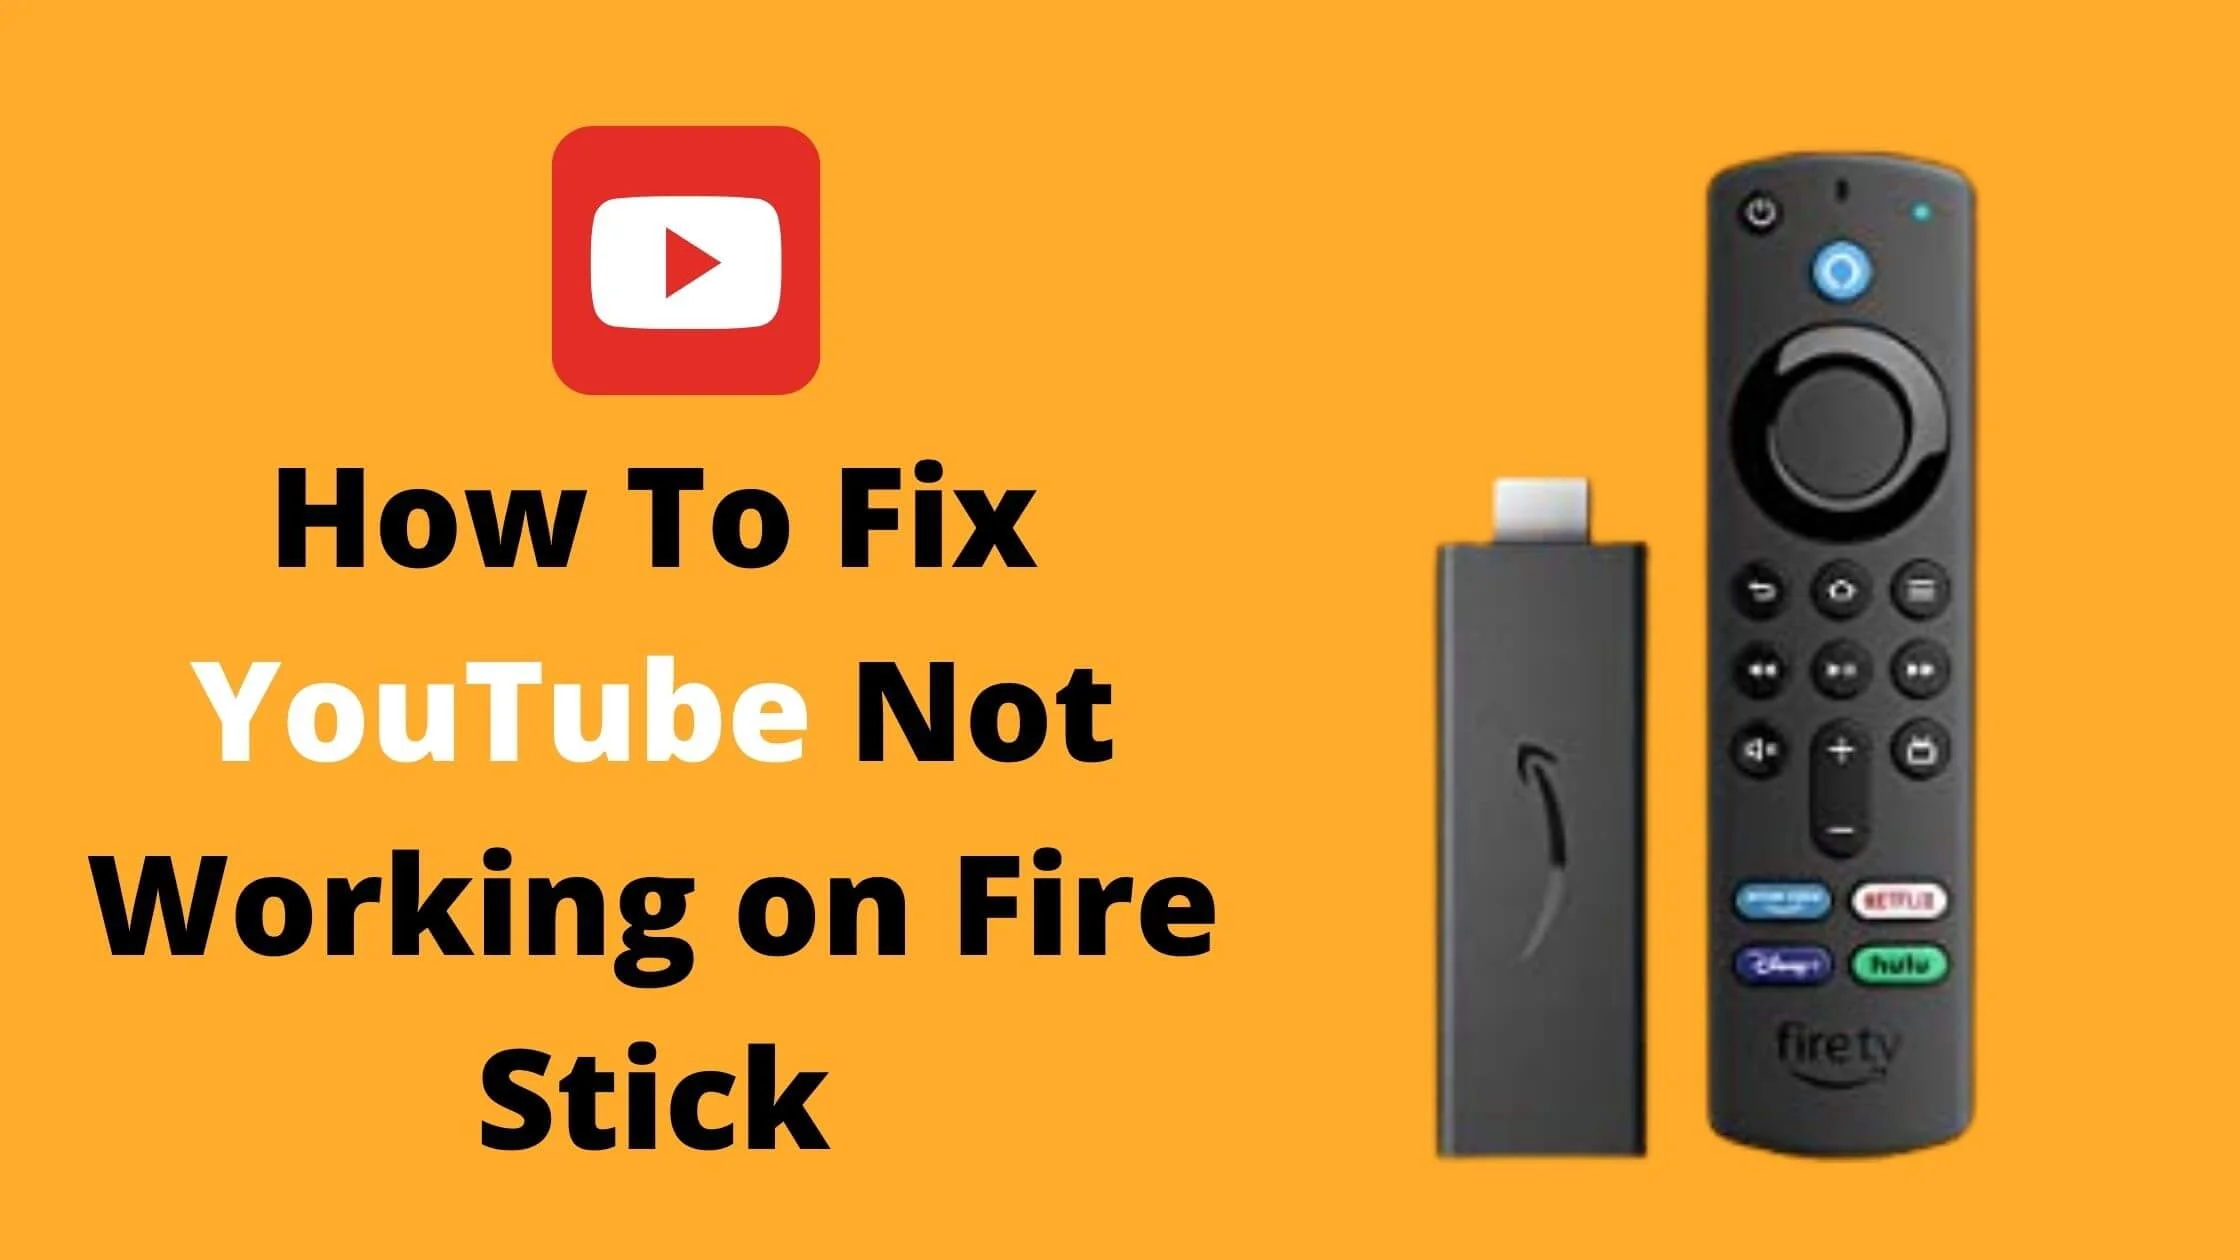 How To Fix YouTube Not Working on Fire Stick